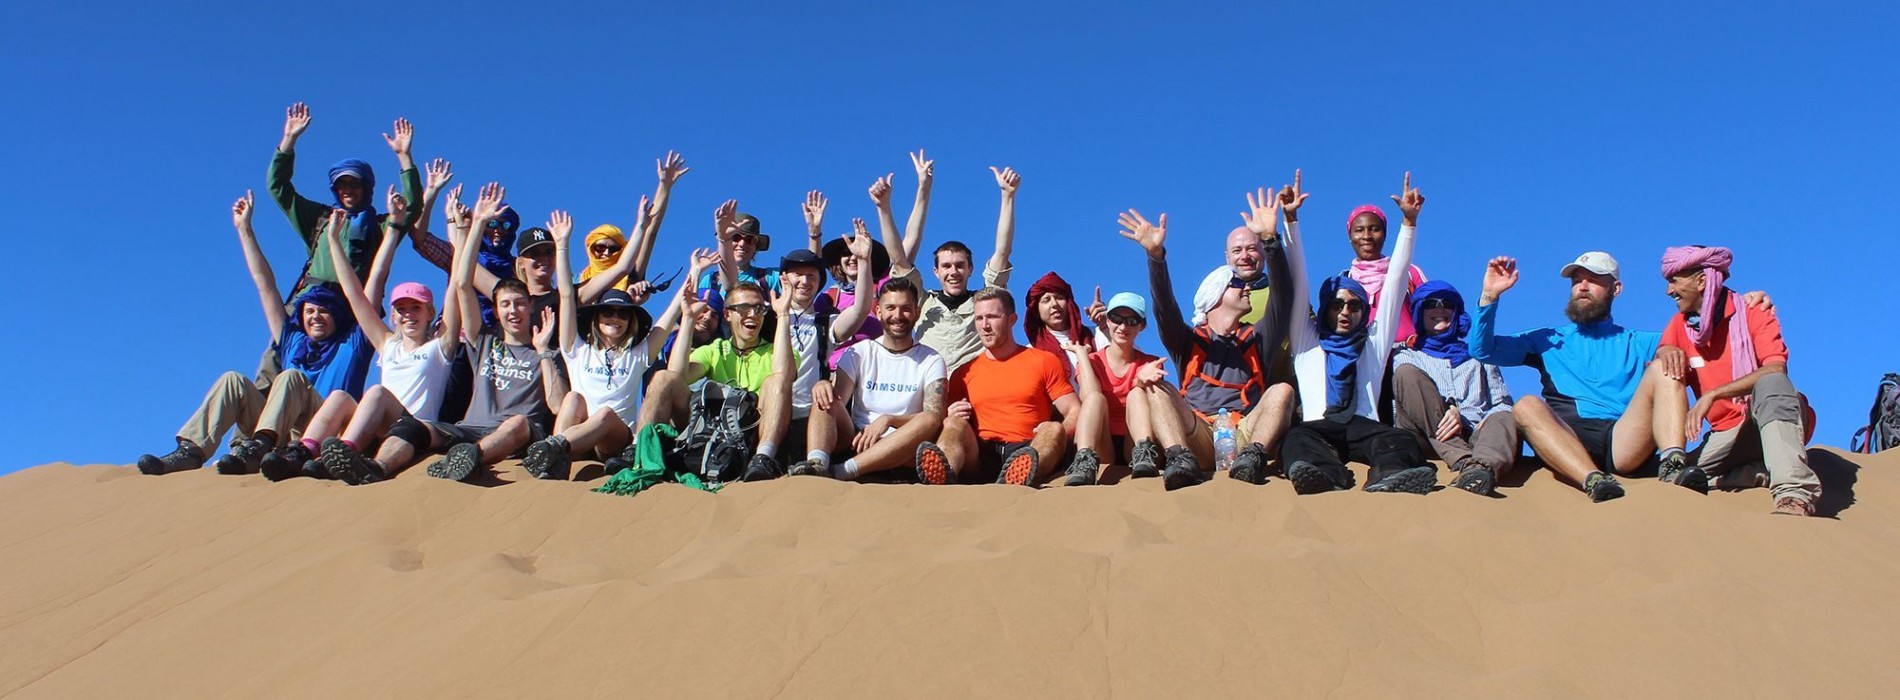 Discover Adventure challenge group celebrating in the Sahara